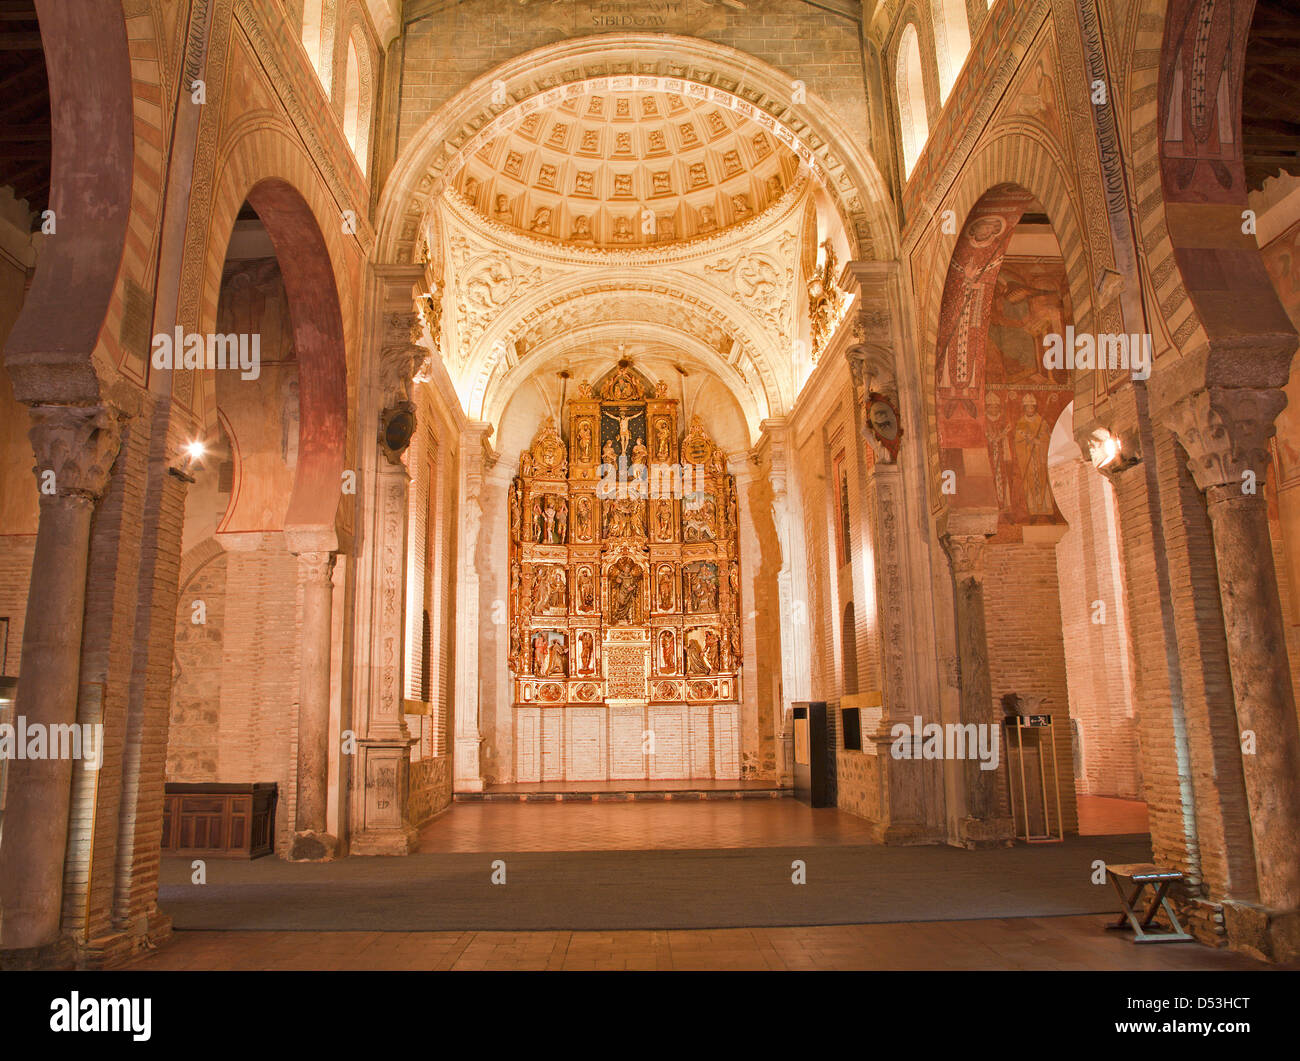 TOLEDO - MARCH 8: Nave and altar of San Roman church has a steeple built in the mudejar architectural style in the 13th cent. Stock Photo